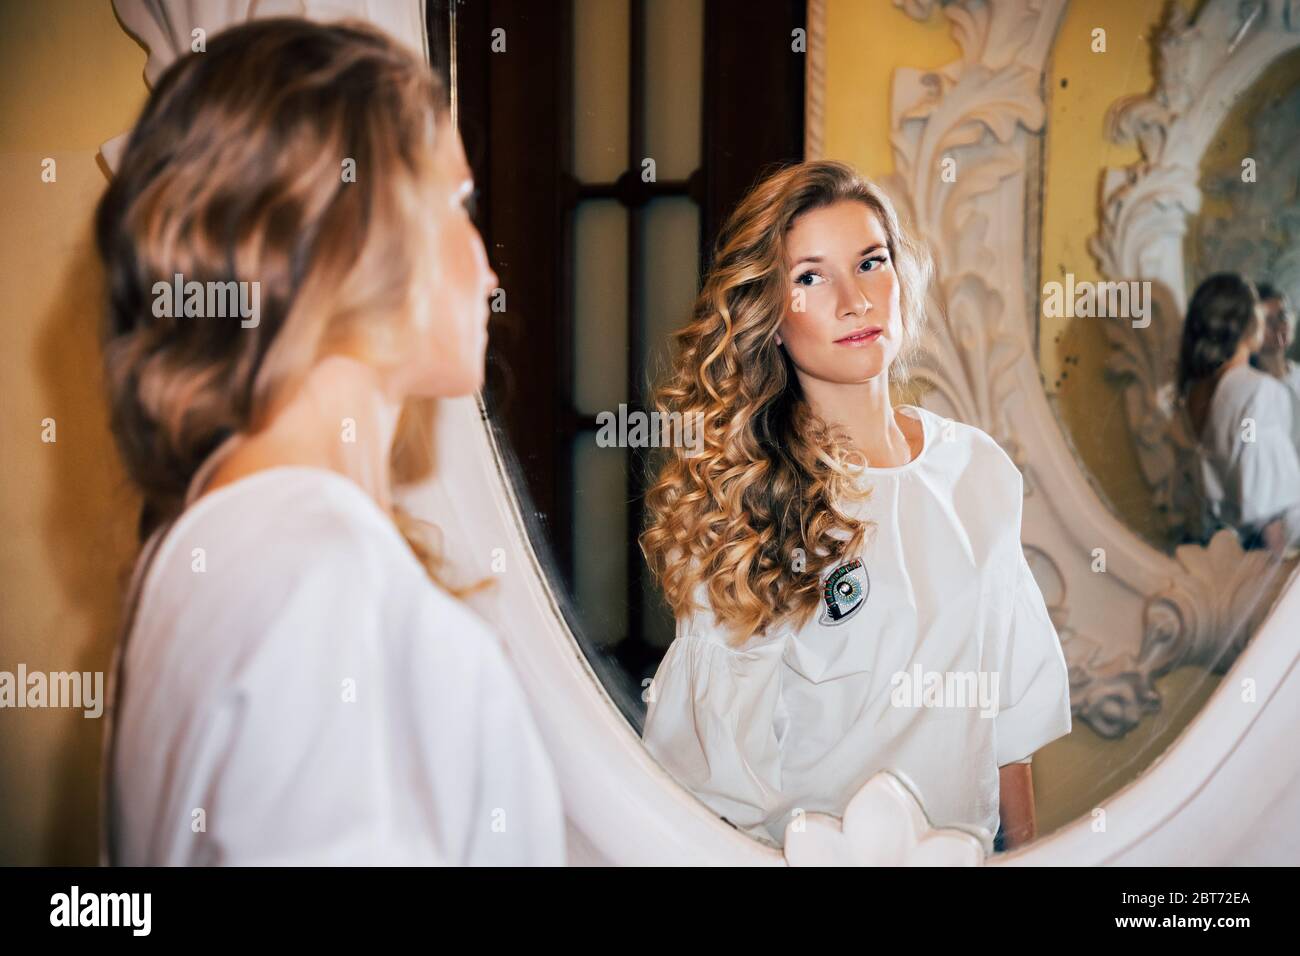 Beautiful girl with long curly blonde hair, wearing a light top, is looking at herself in a richly ornamented mirror. Stock Photo